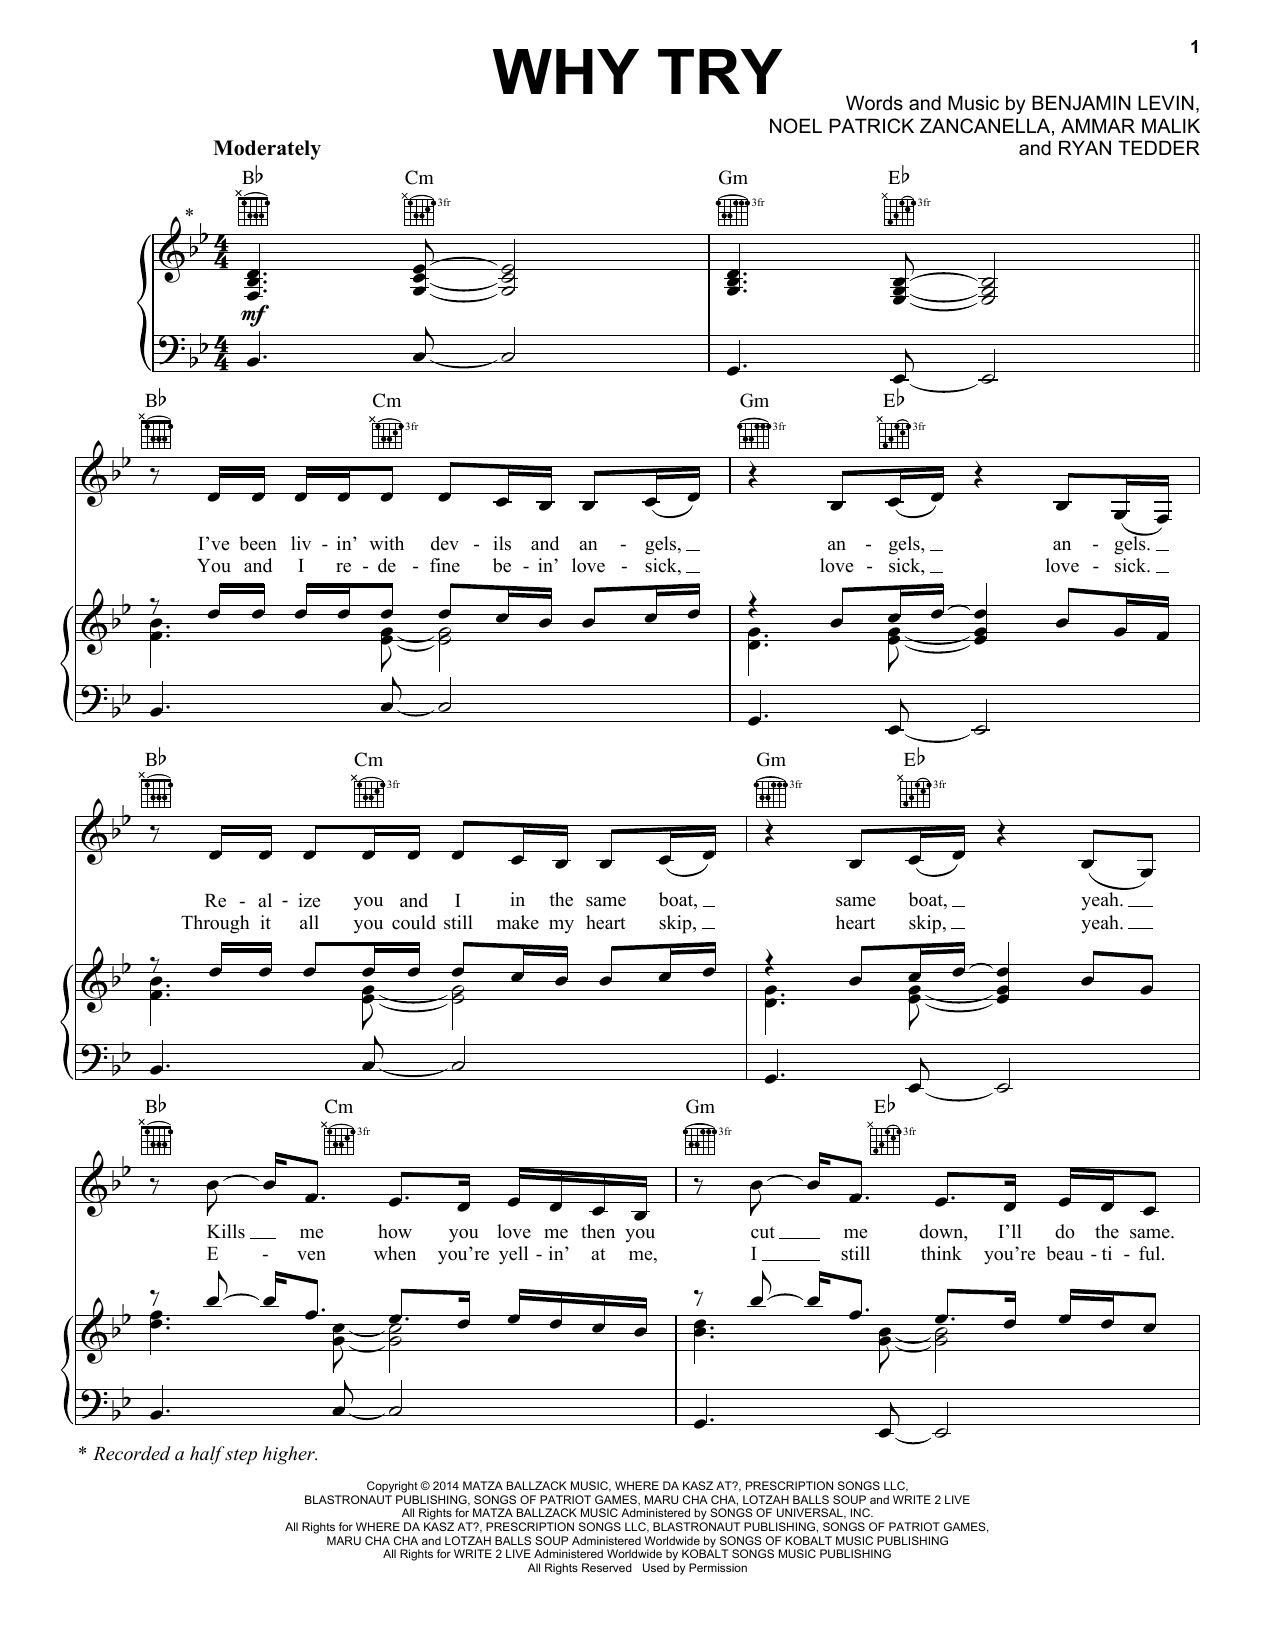 Ariana Grande Why Try sheet music notes and chords. Download Printable PDF.